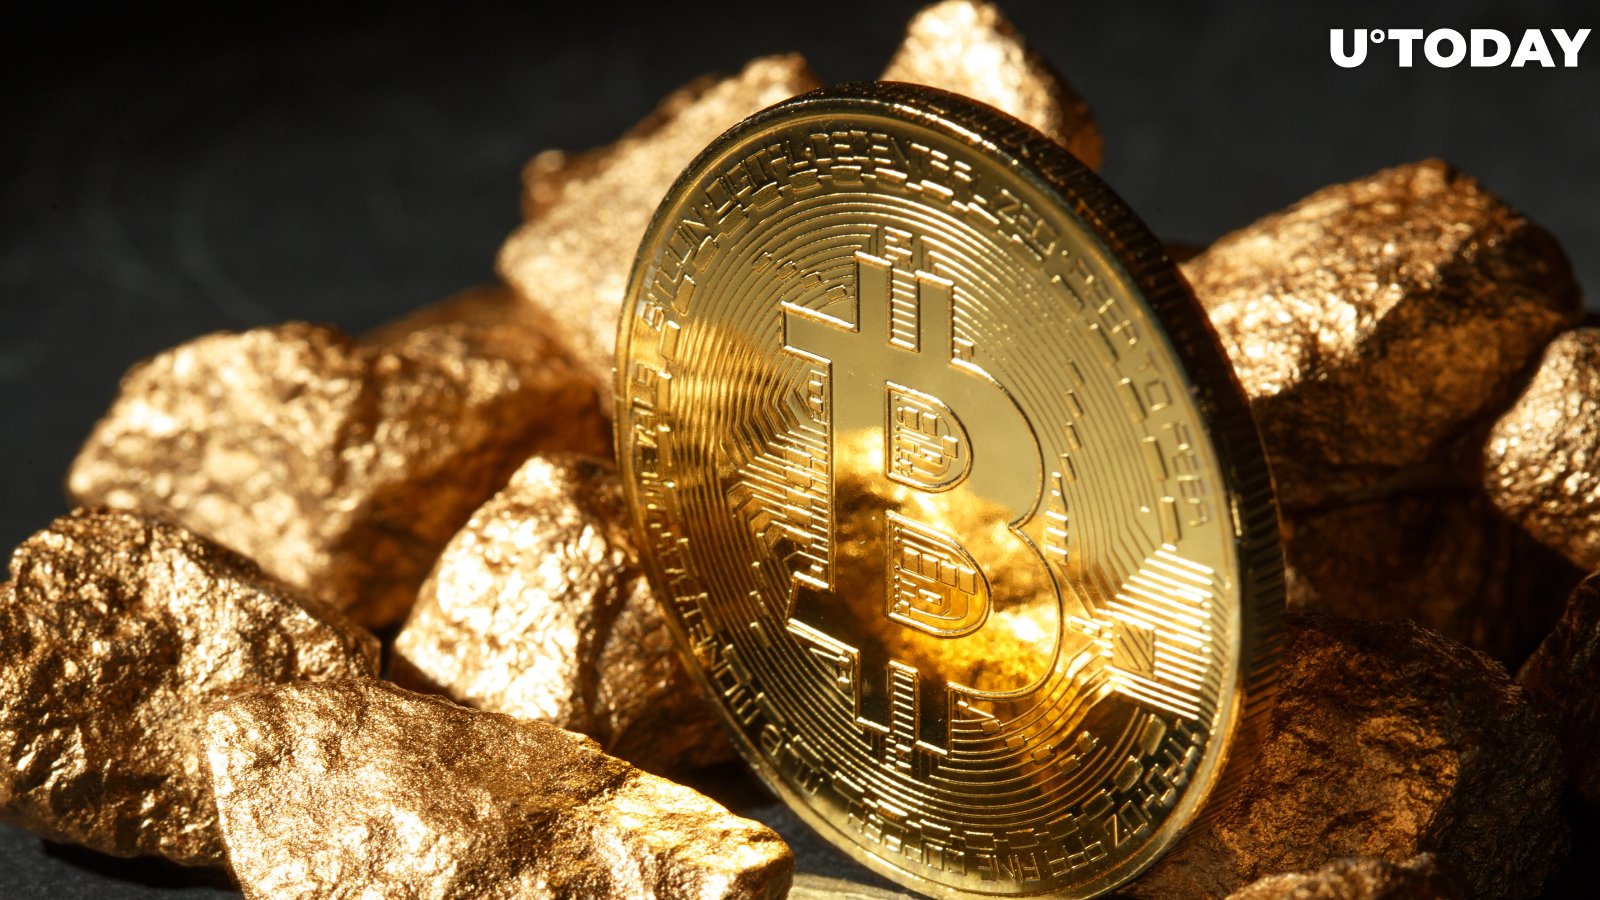 Bitcoin Will Never Replace Gold, Says Agnico Eagle CEO